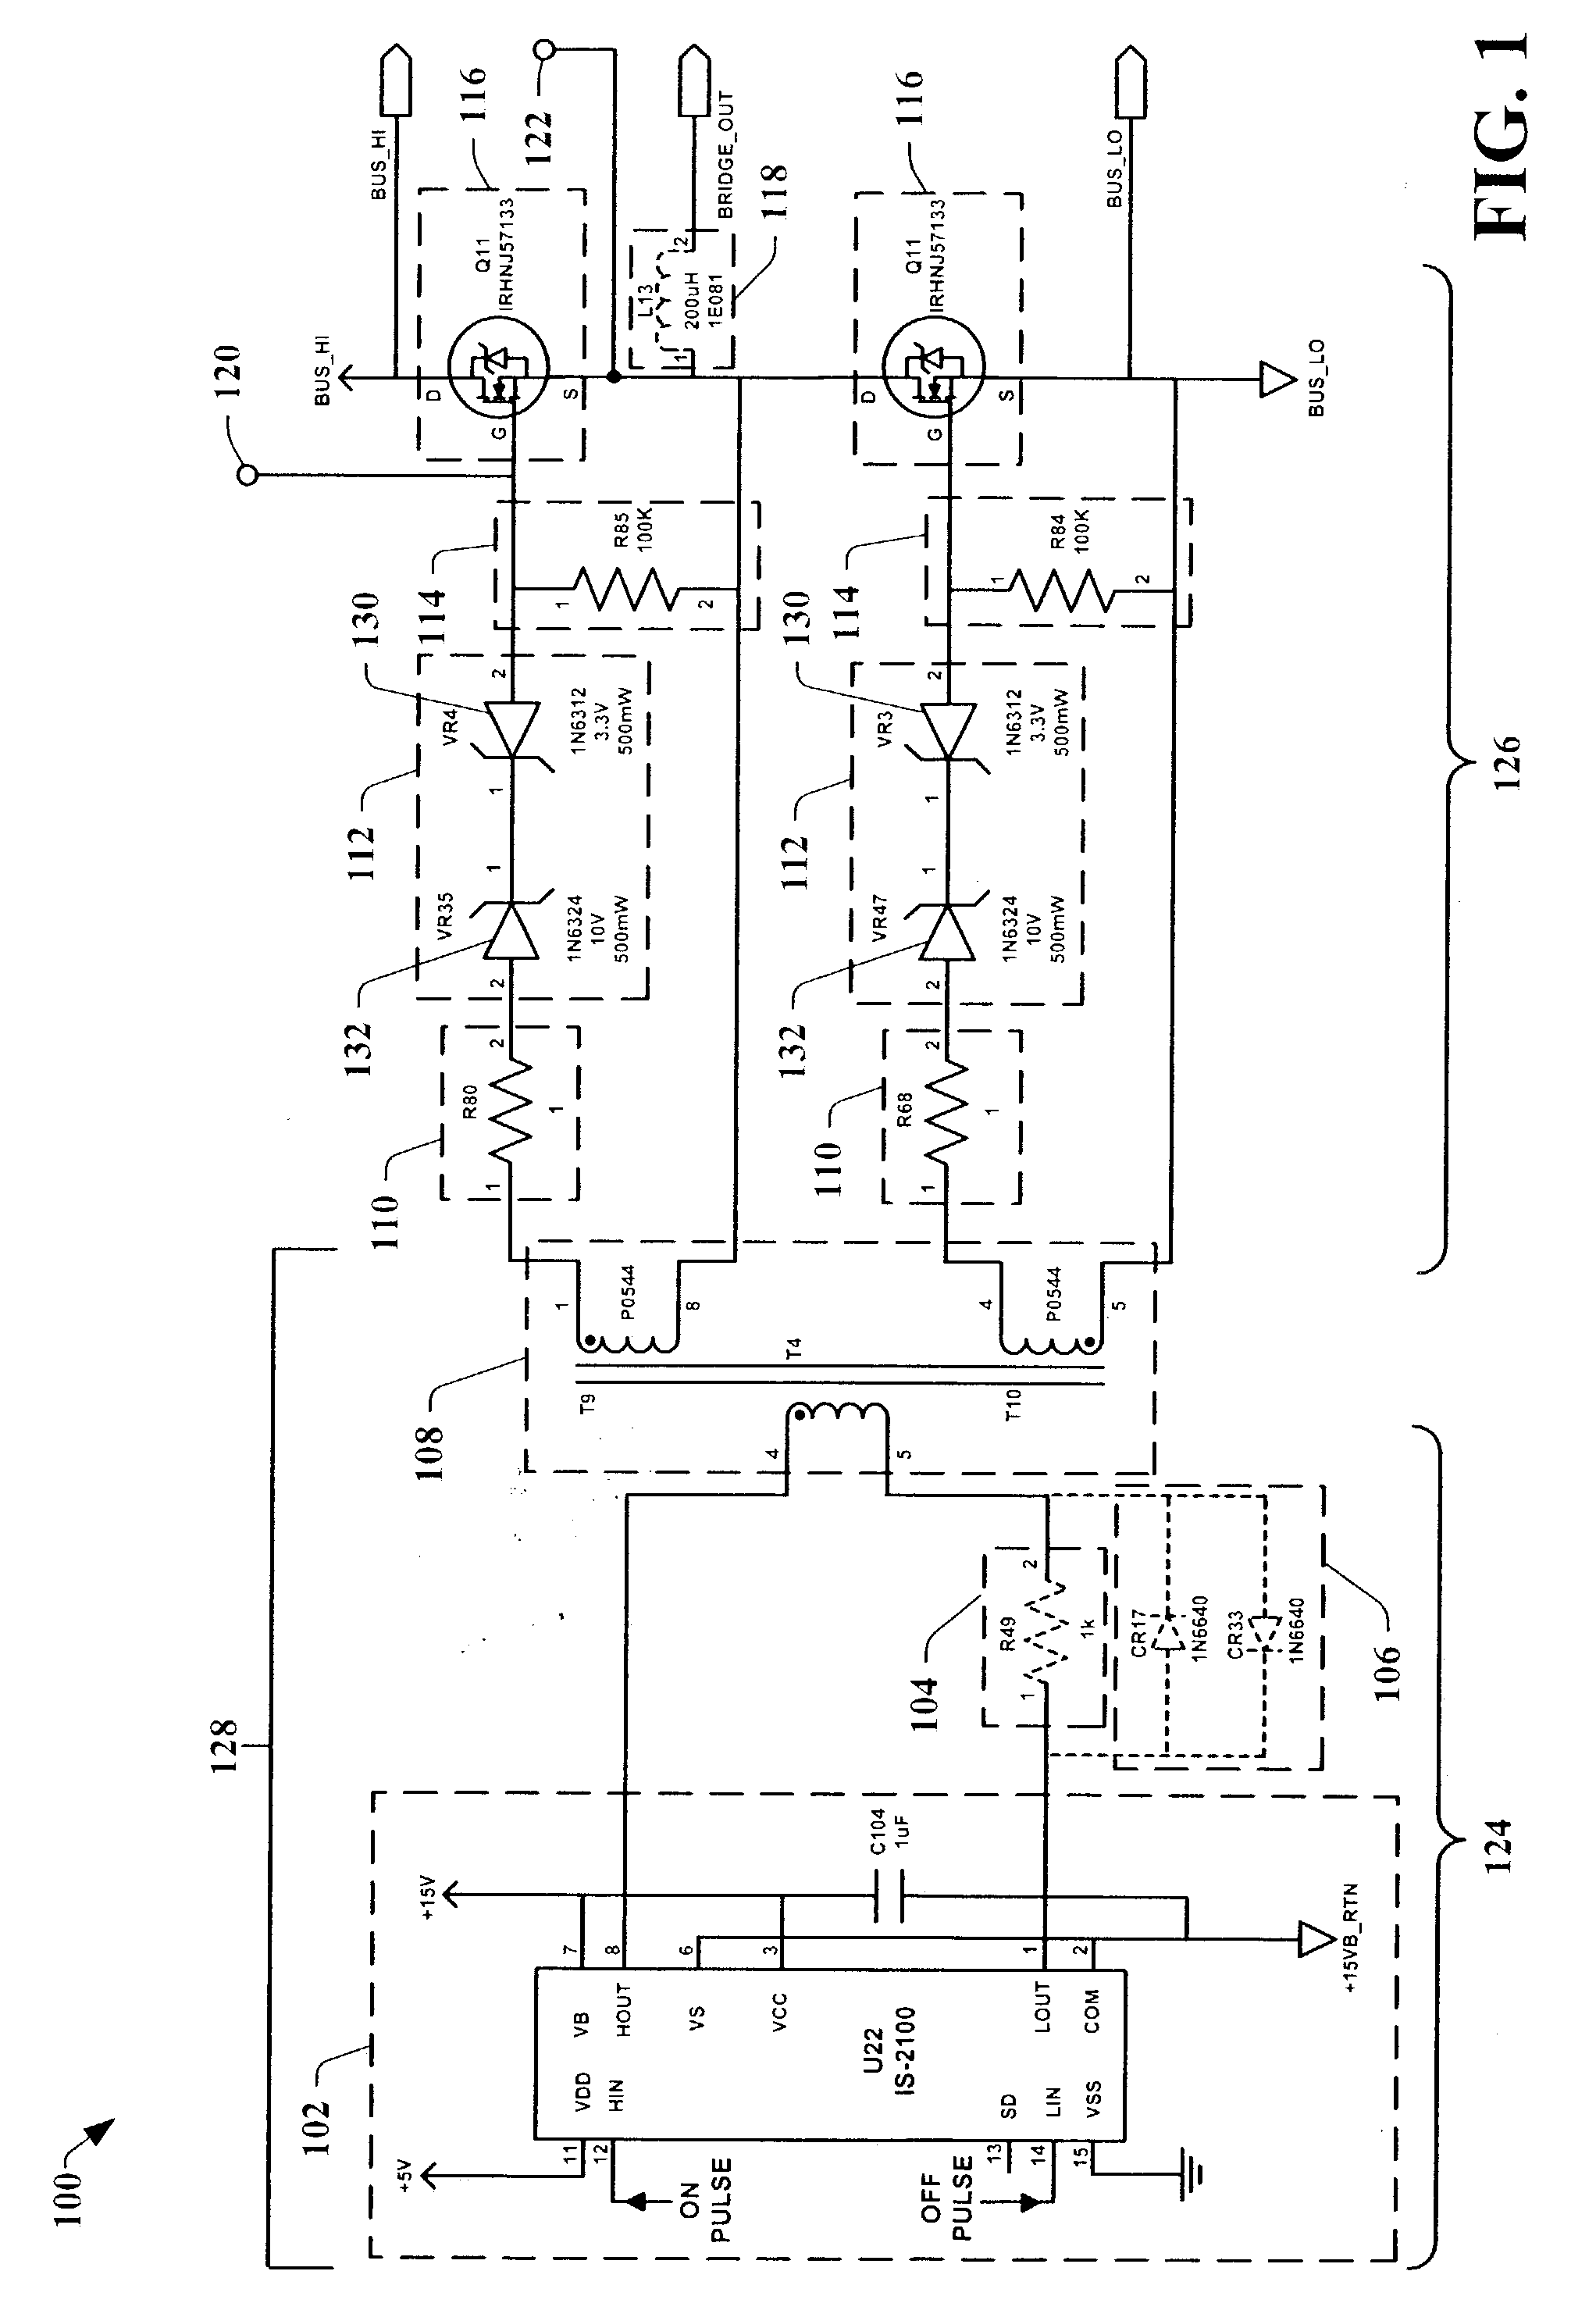 Isolated FET drive utilizing Zener diode based systems, methods and apparatus